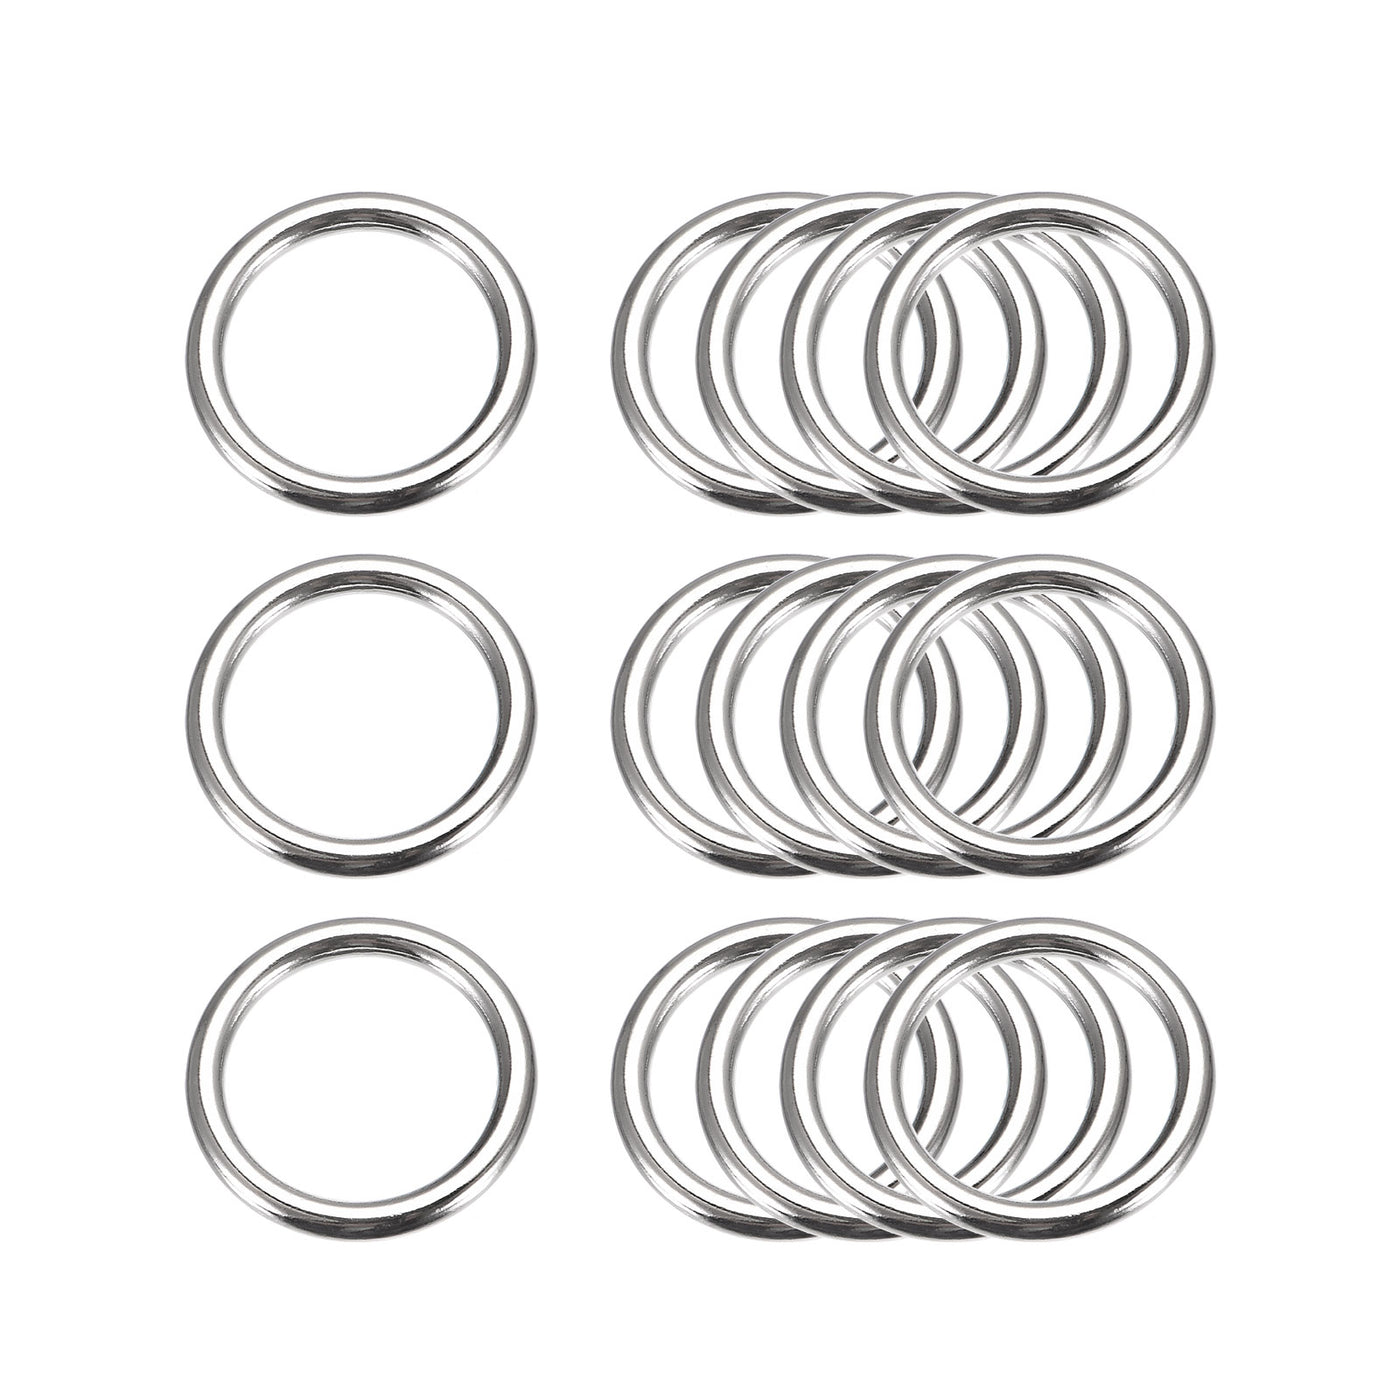 uxcell Uxcell Metal O Rings, 15pcs 20mm(0.79") ID 3mm Thick Welded O-Ringe, Silver Tone